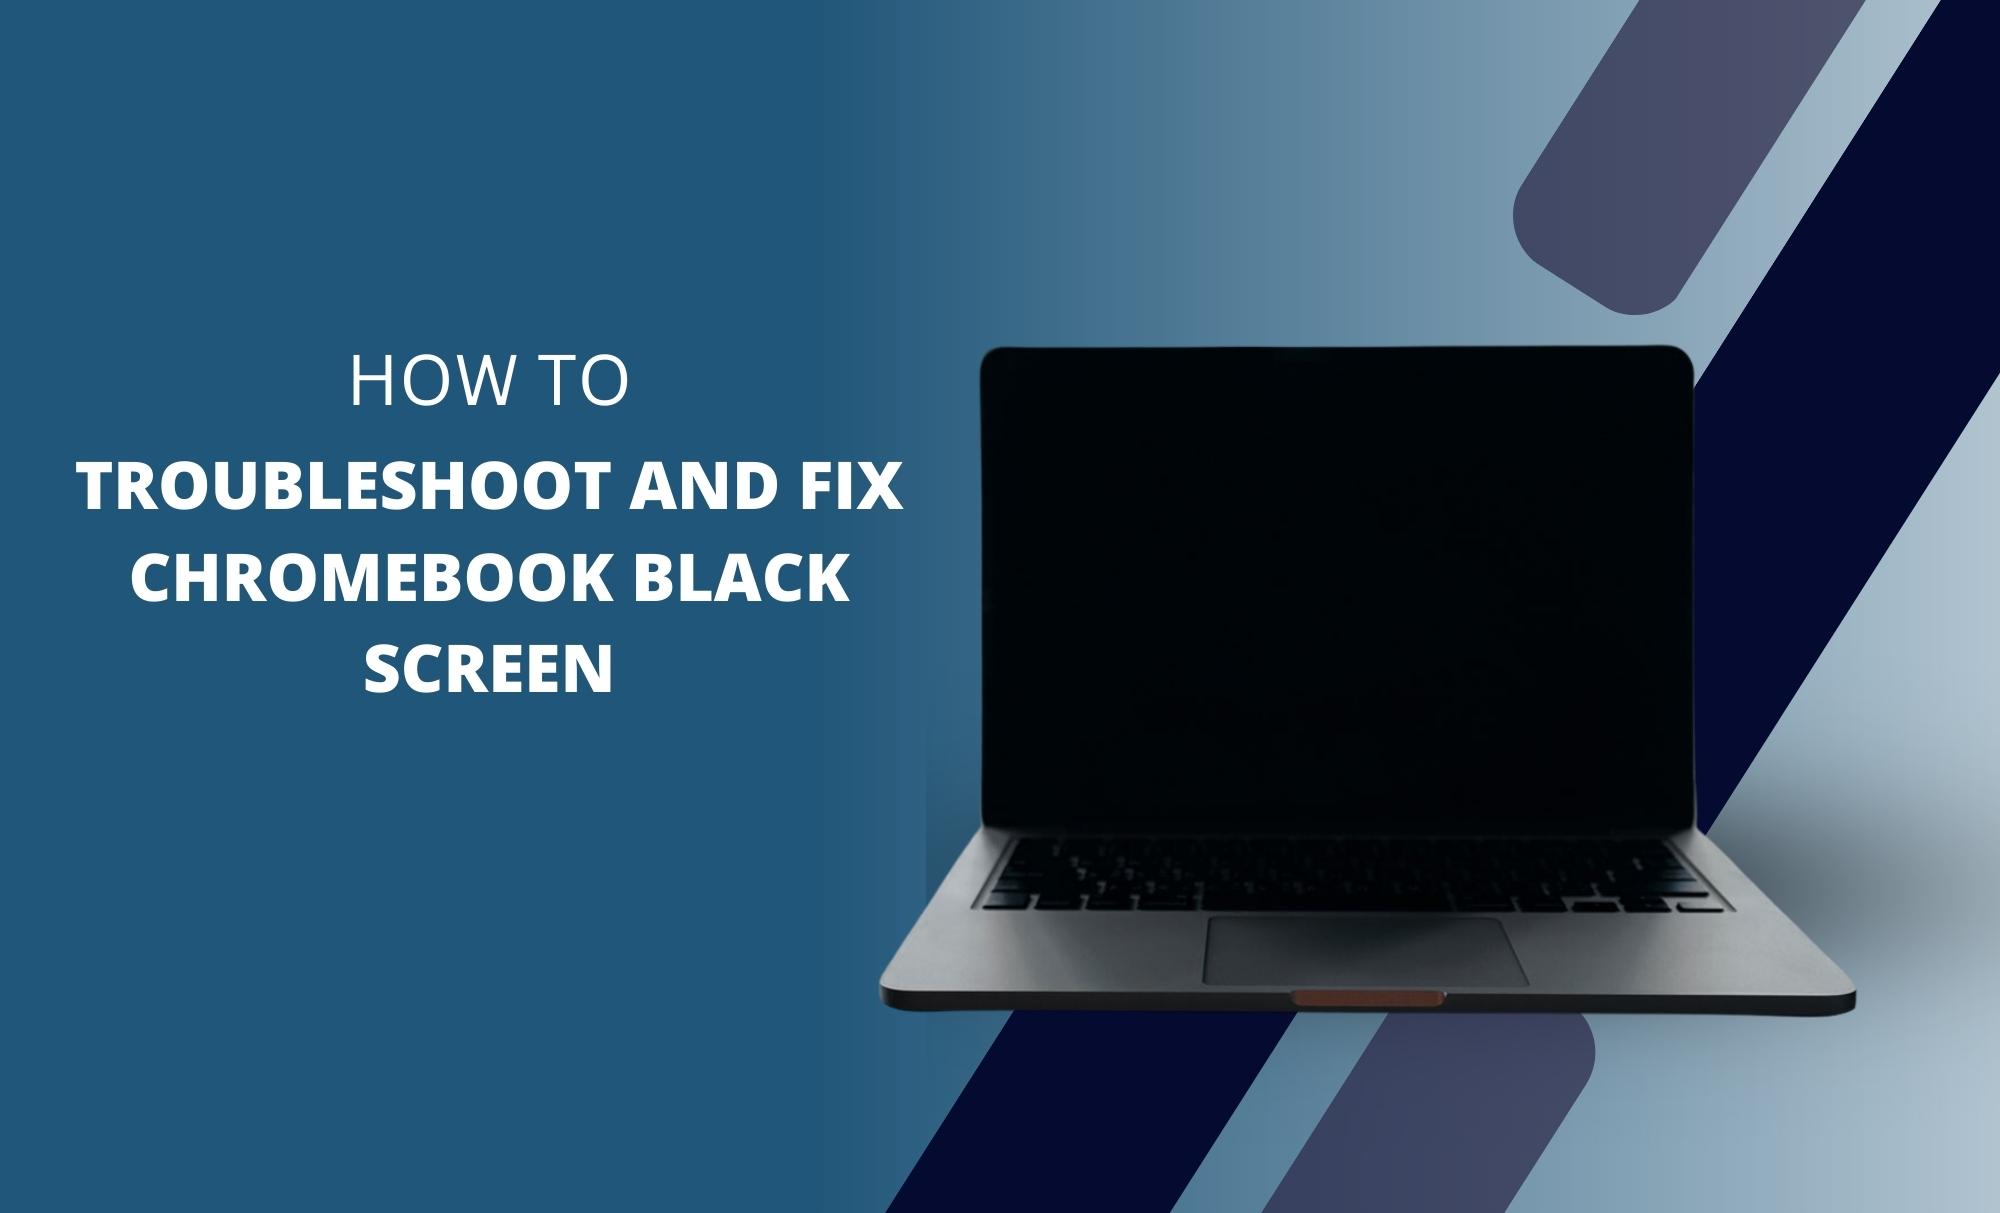 How to Troubleshoot and Fix Chromebook Black Screen